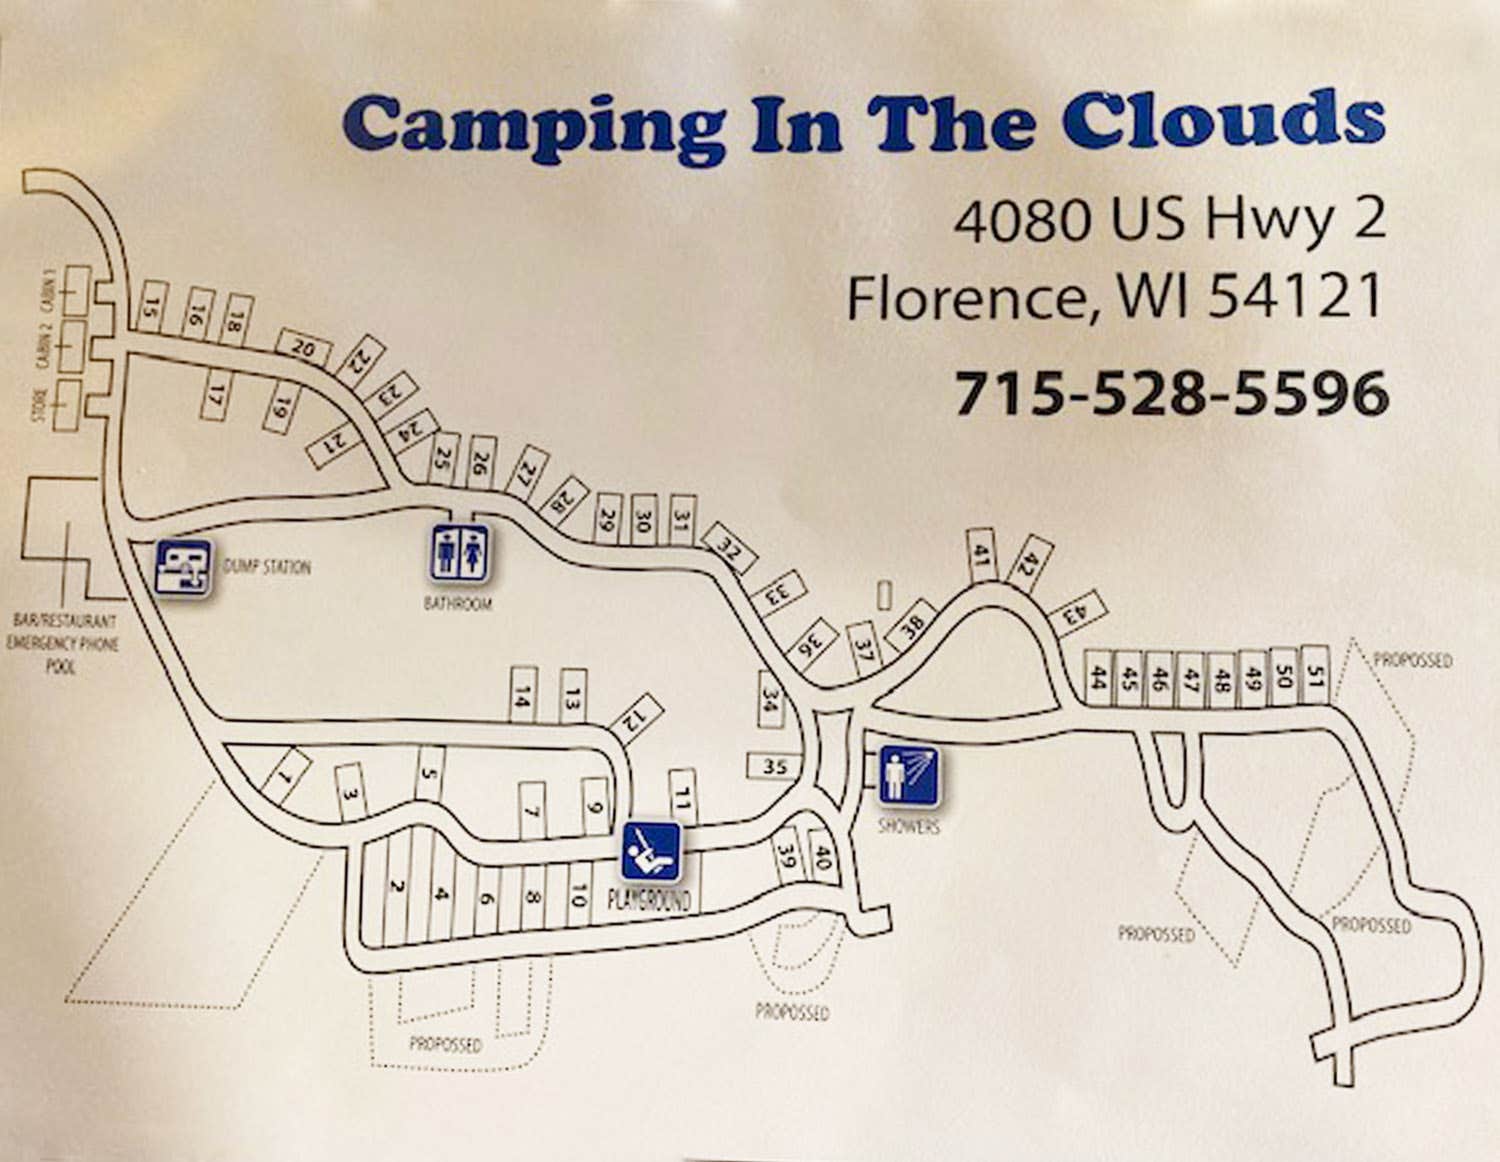 Camper submitted image from Camping in the Clouds - 1